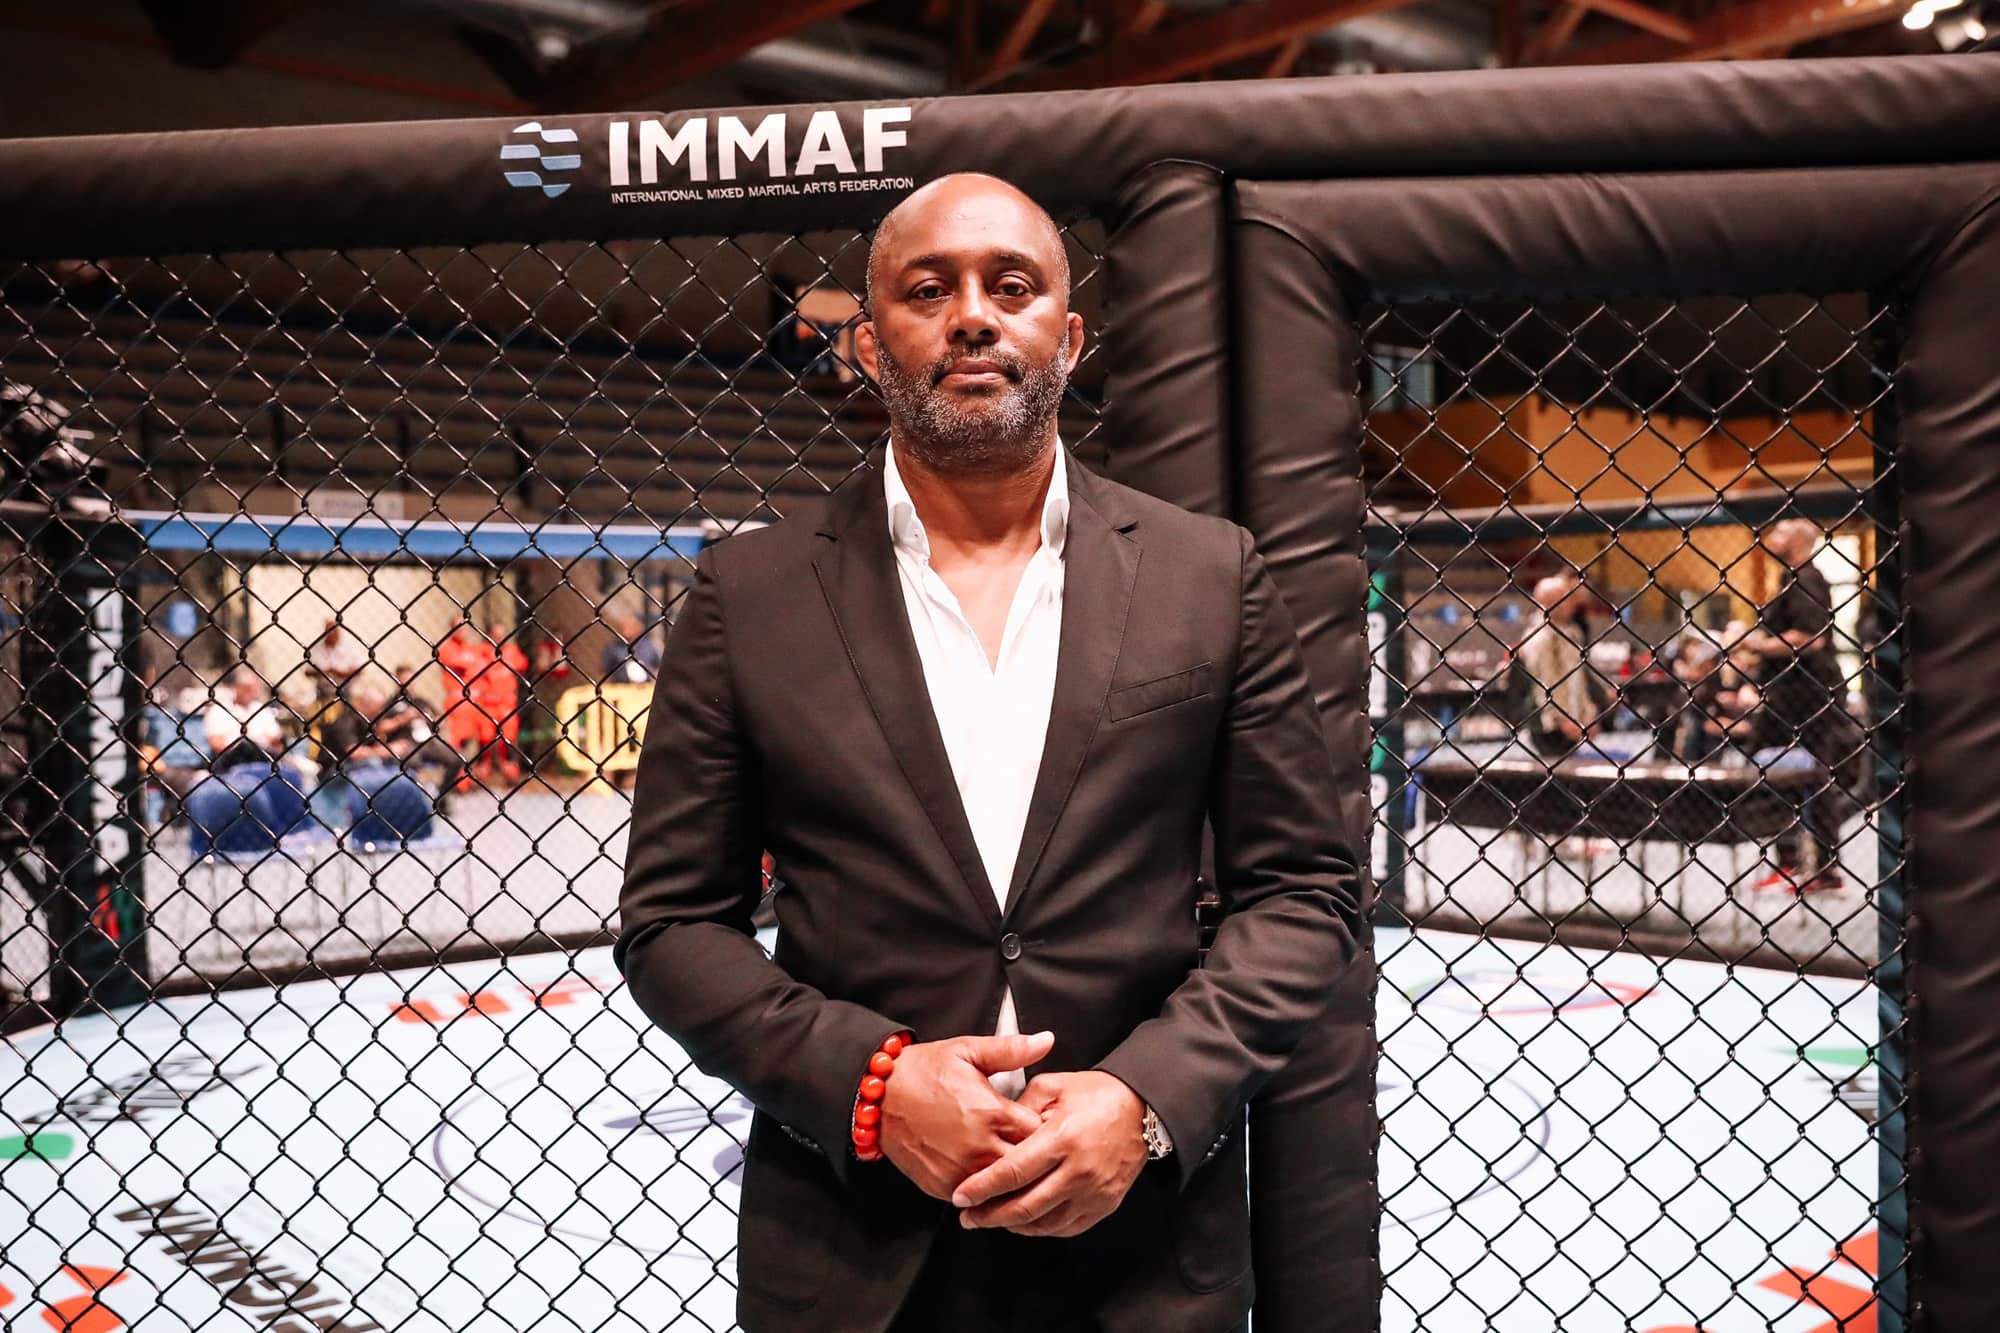 IMMAF President Kerrith Brown Discusses Development of MMA in Asia Ahead of 2022 Asian Championships